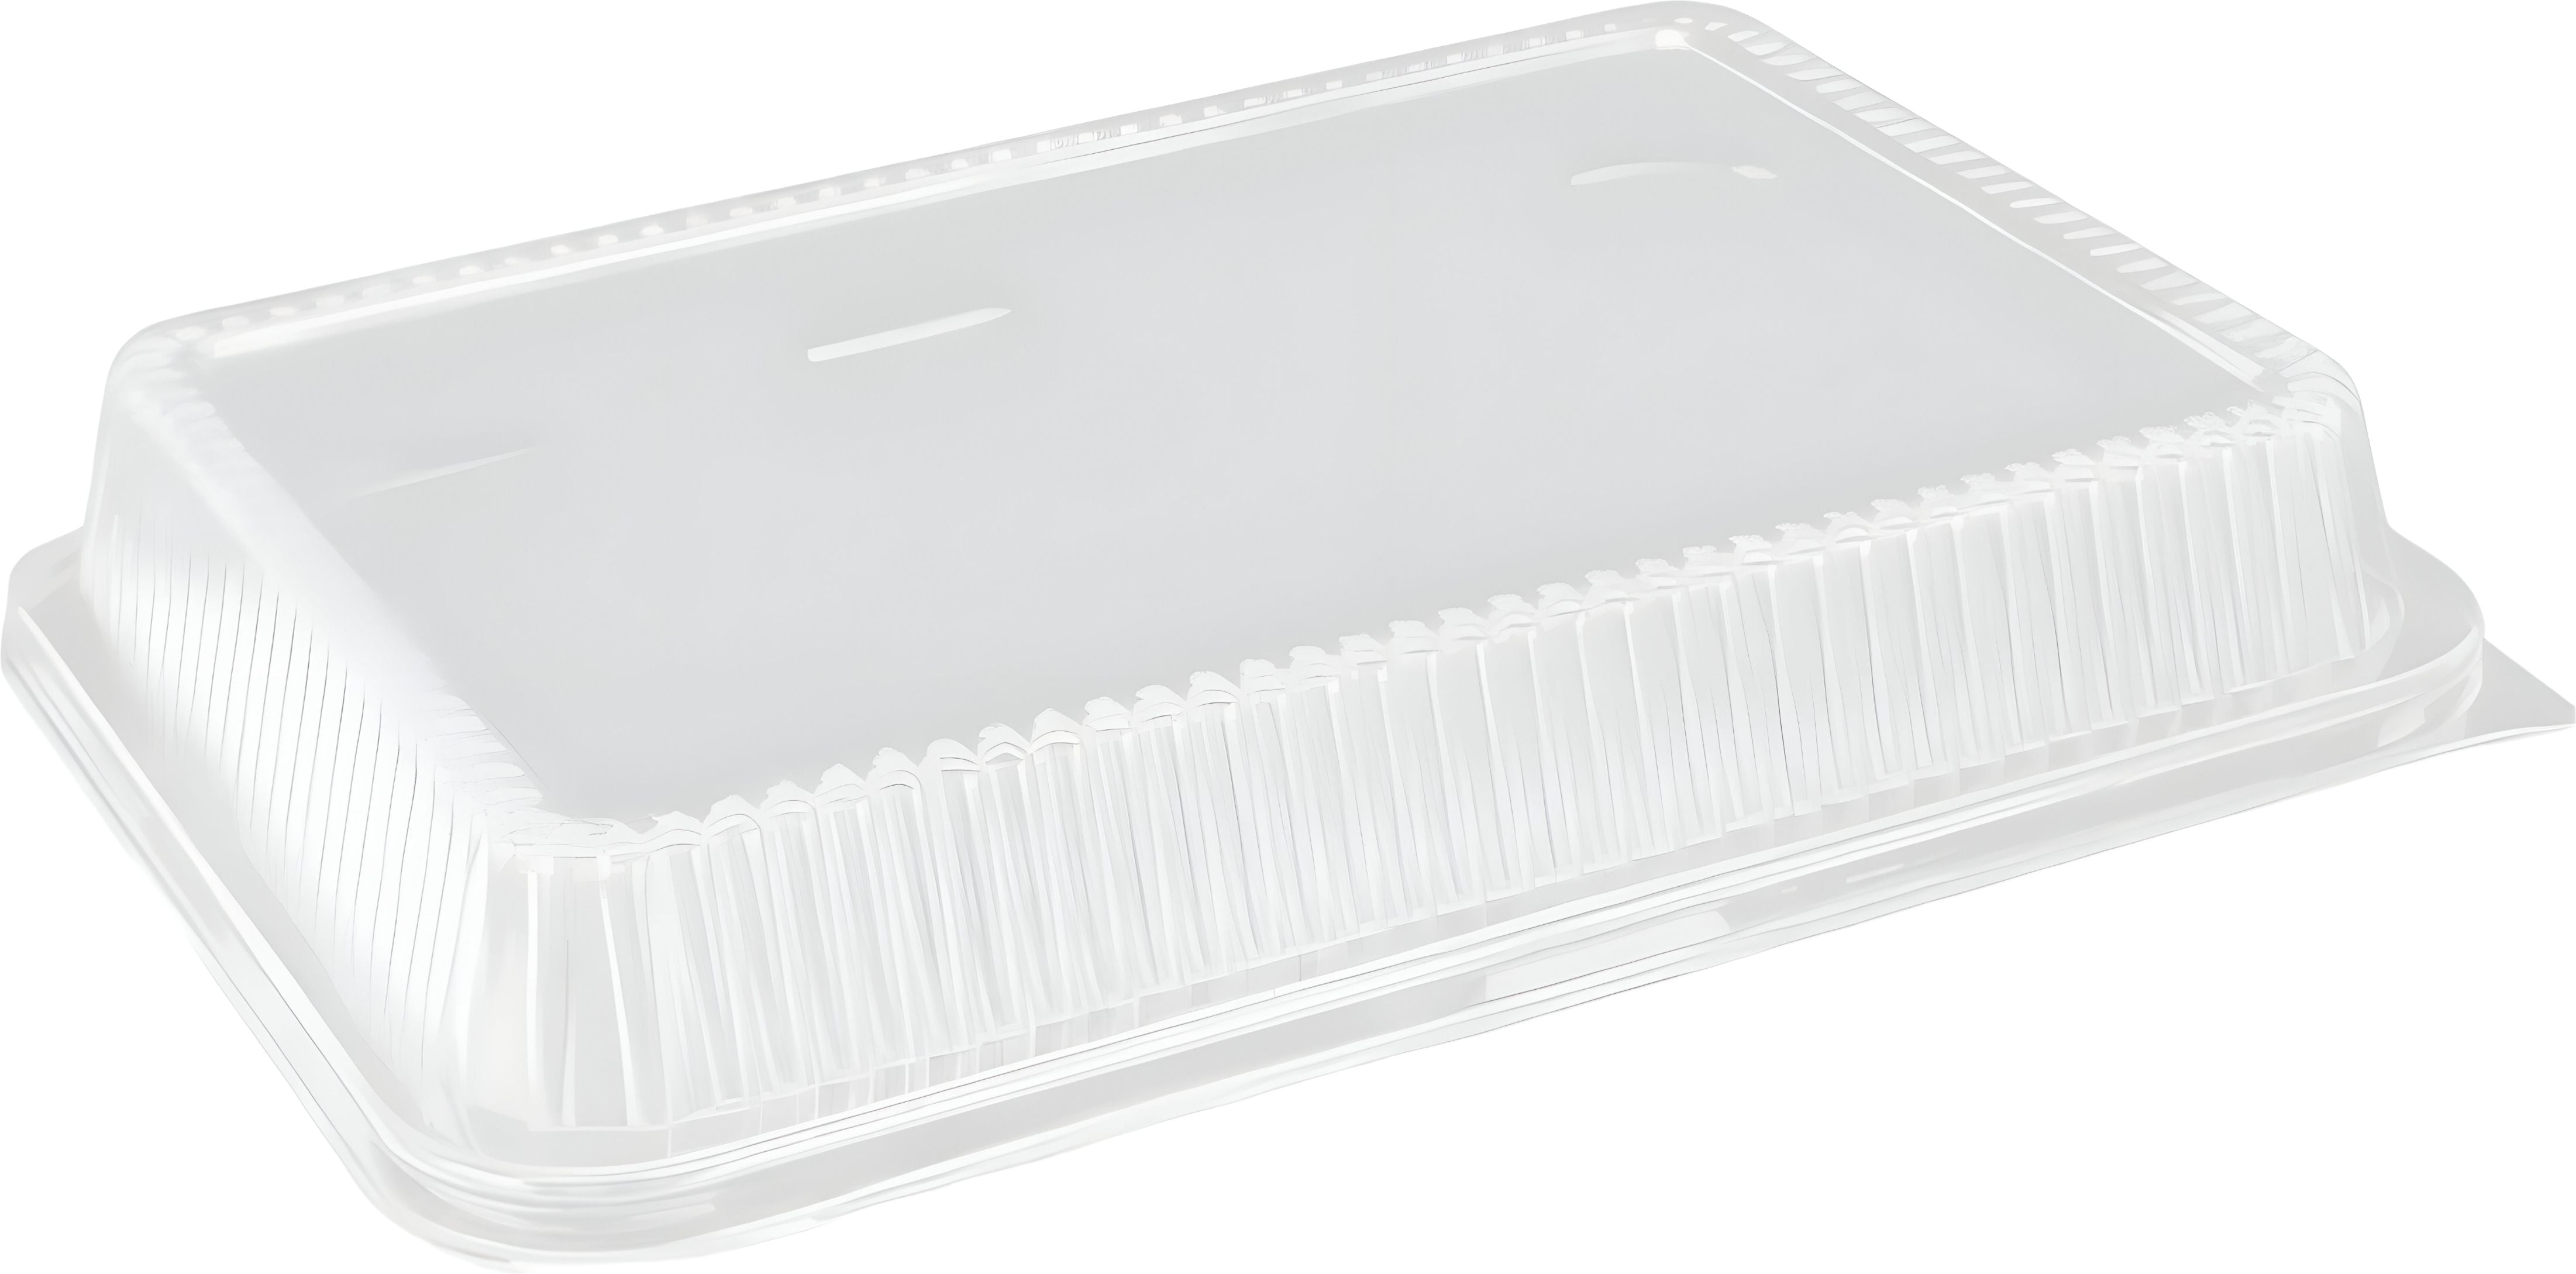 HFA - Plastic Dome Lid For 4044 Plastic Containers, 500/Cs - 4044DL